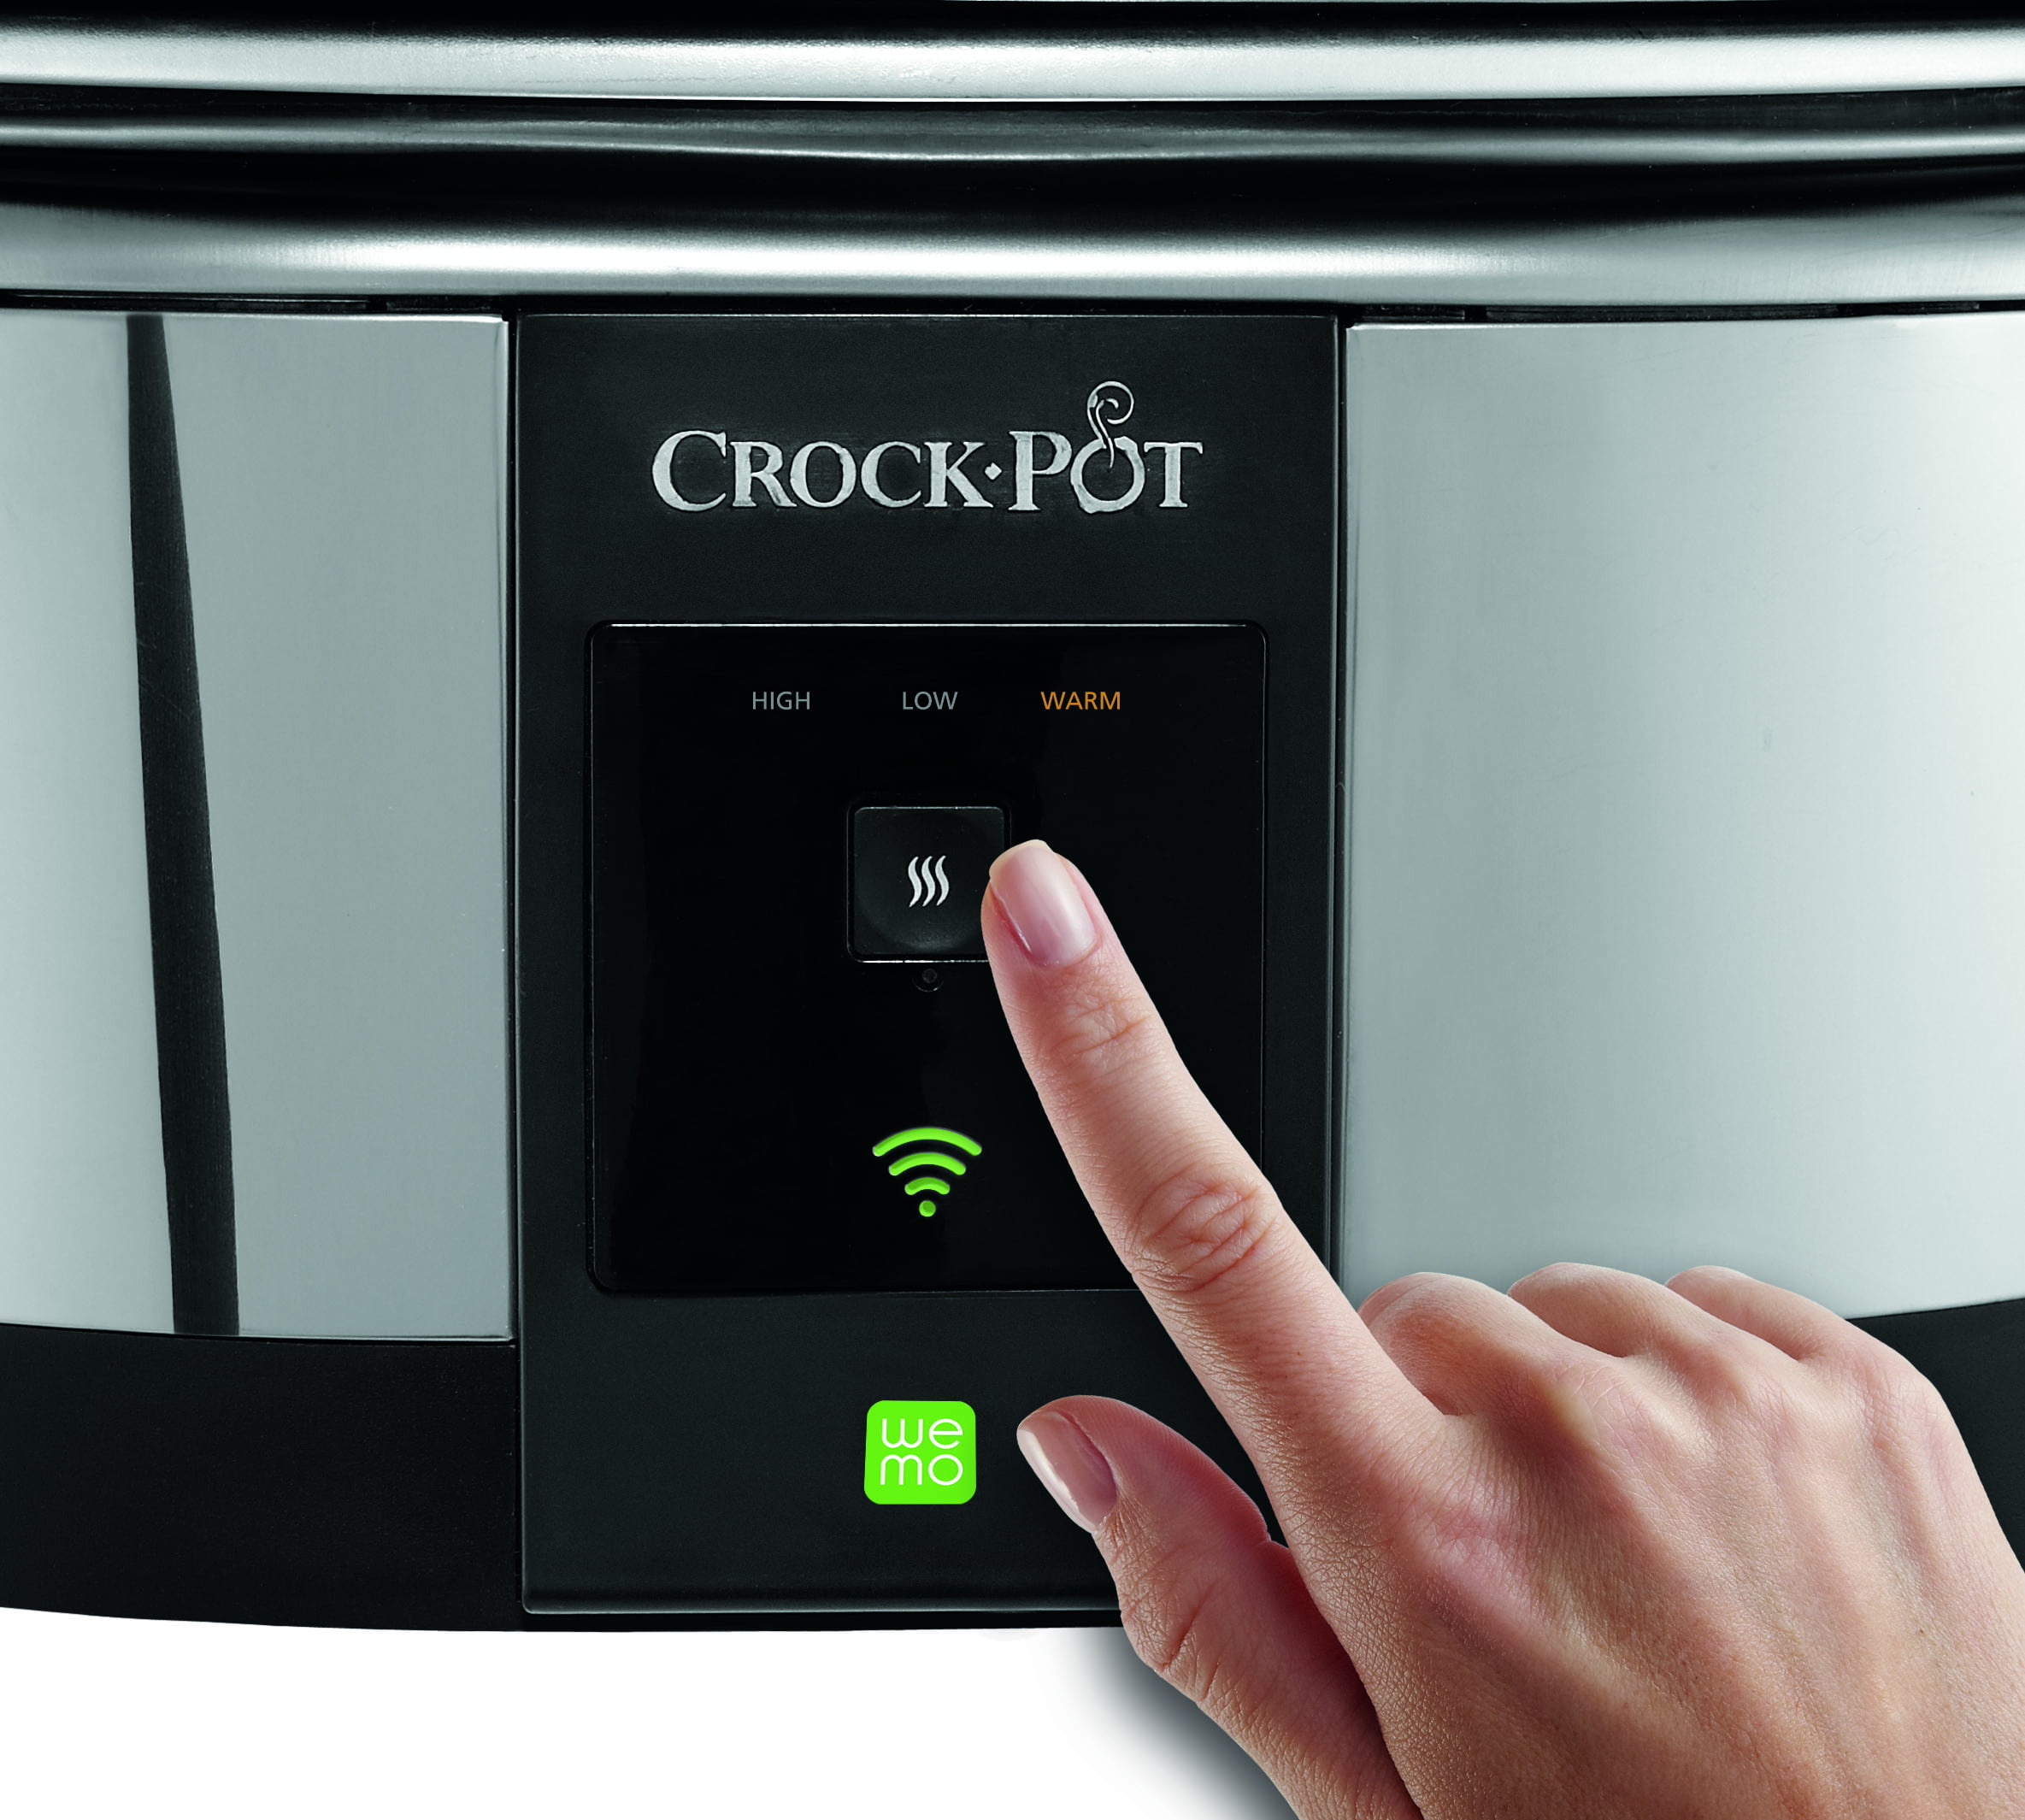 Belkin's Smartphone-Controlled Crock-Pot Doesn't Dish Enough